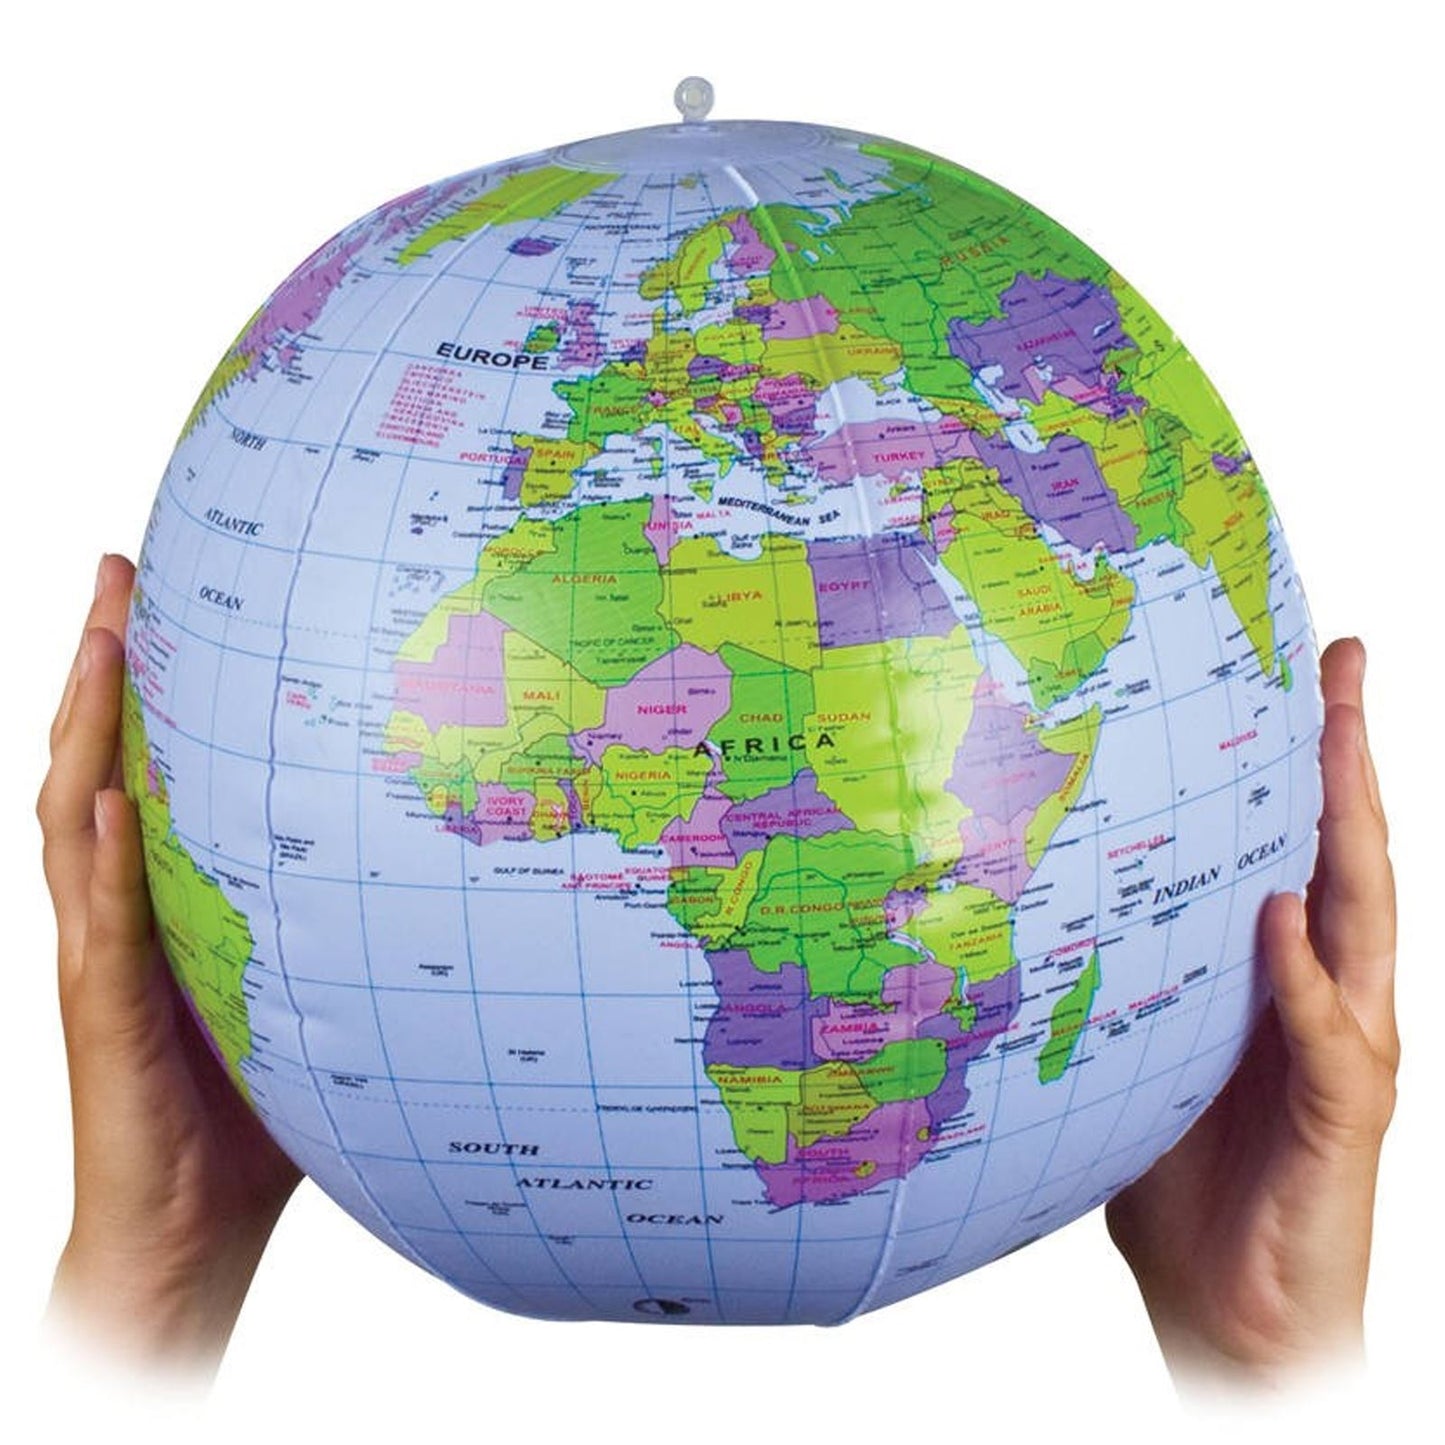 Explore The World With The Inflatable Pvc World Globe